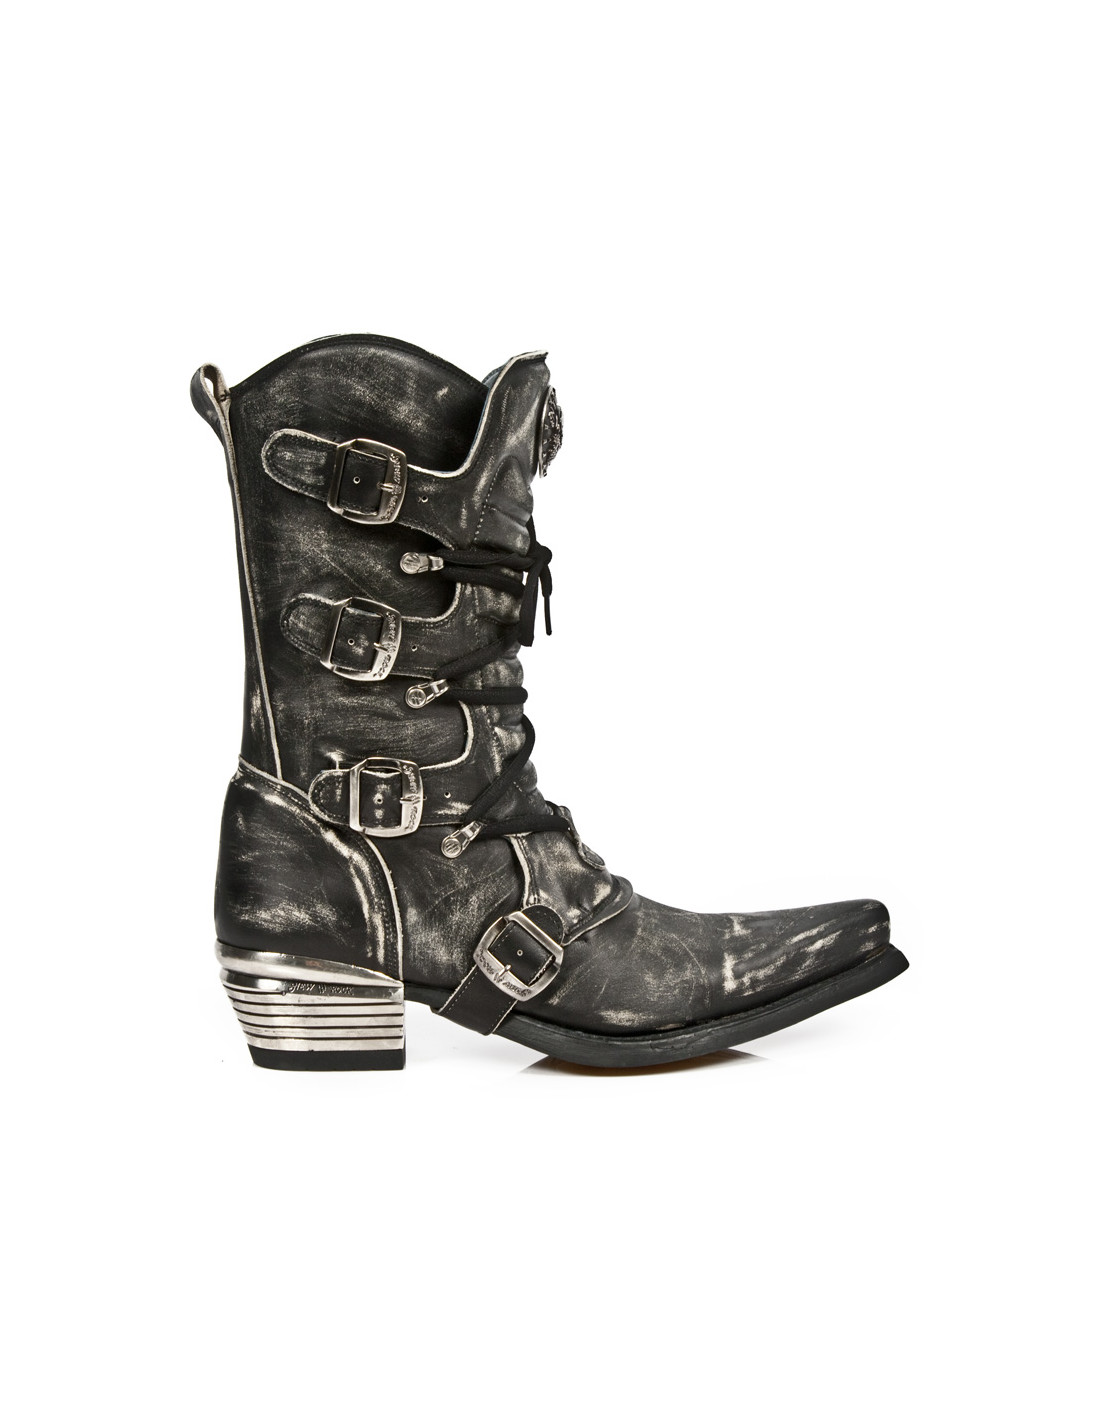 BOOT WEST M-7993-S3